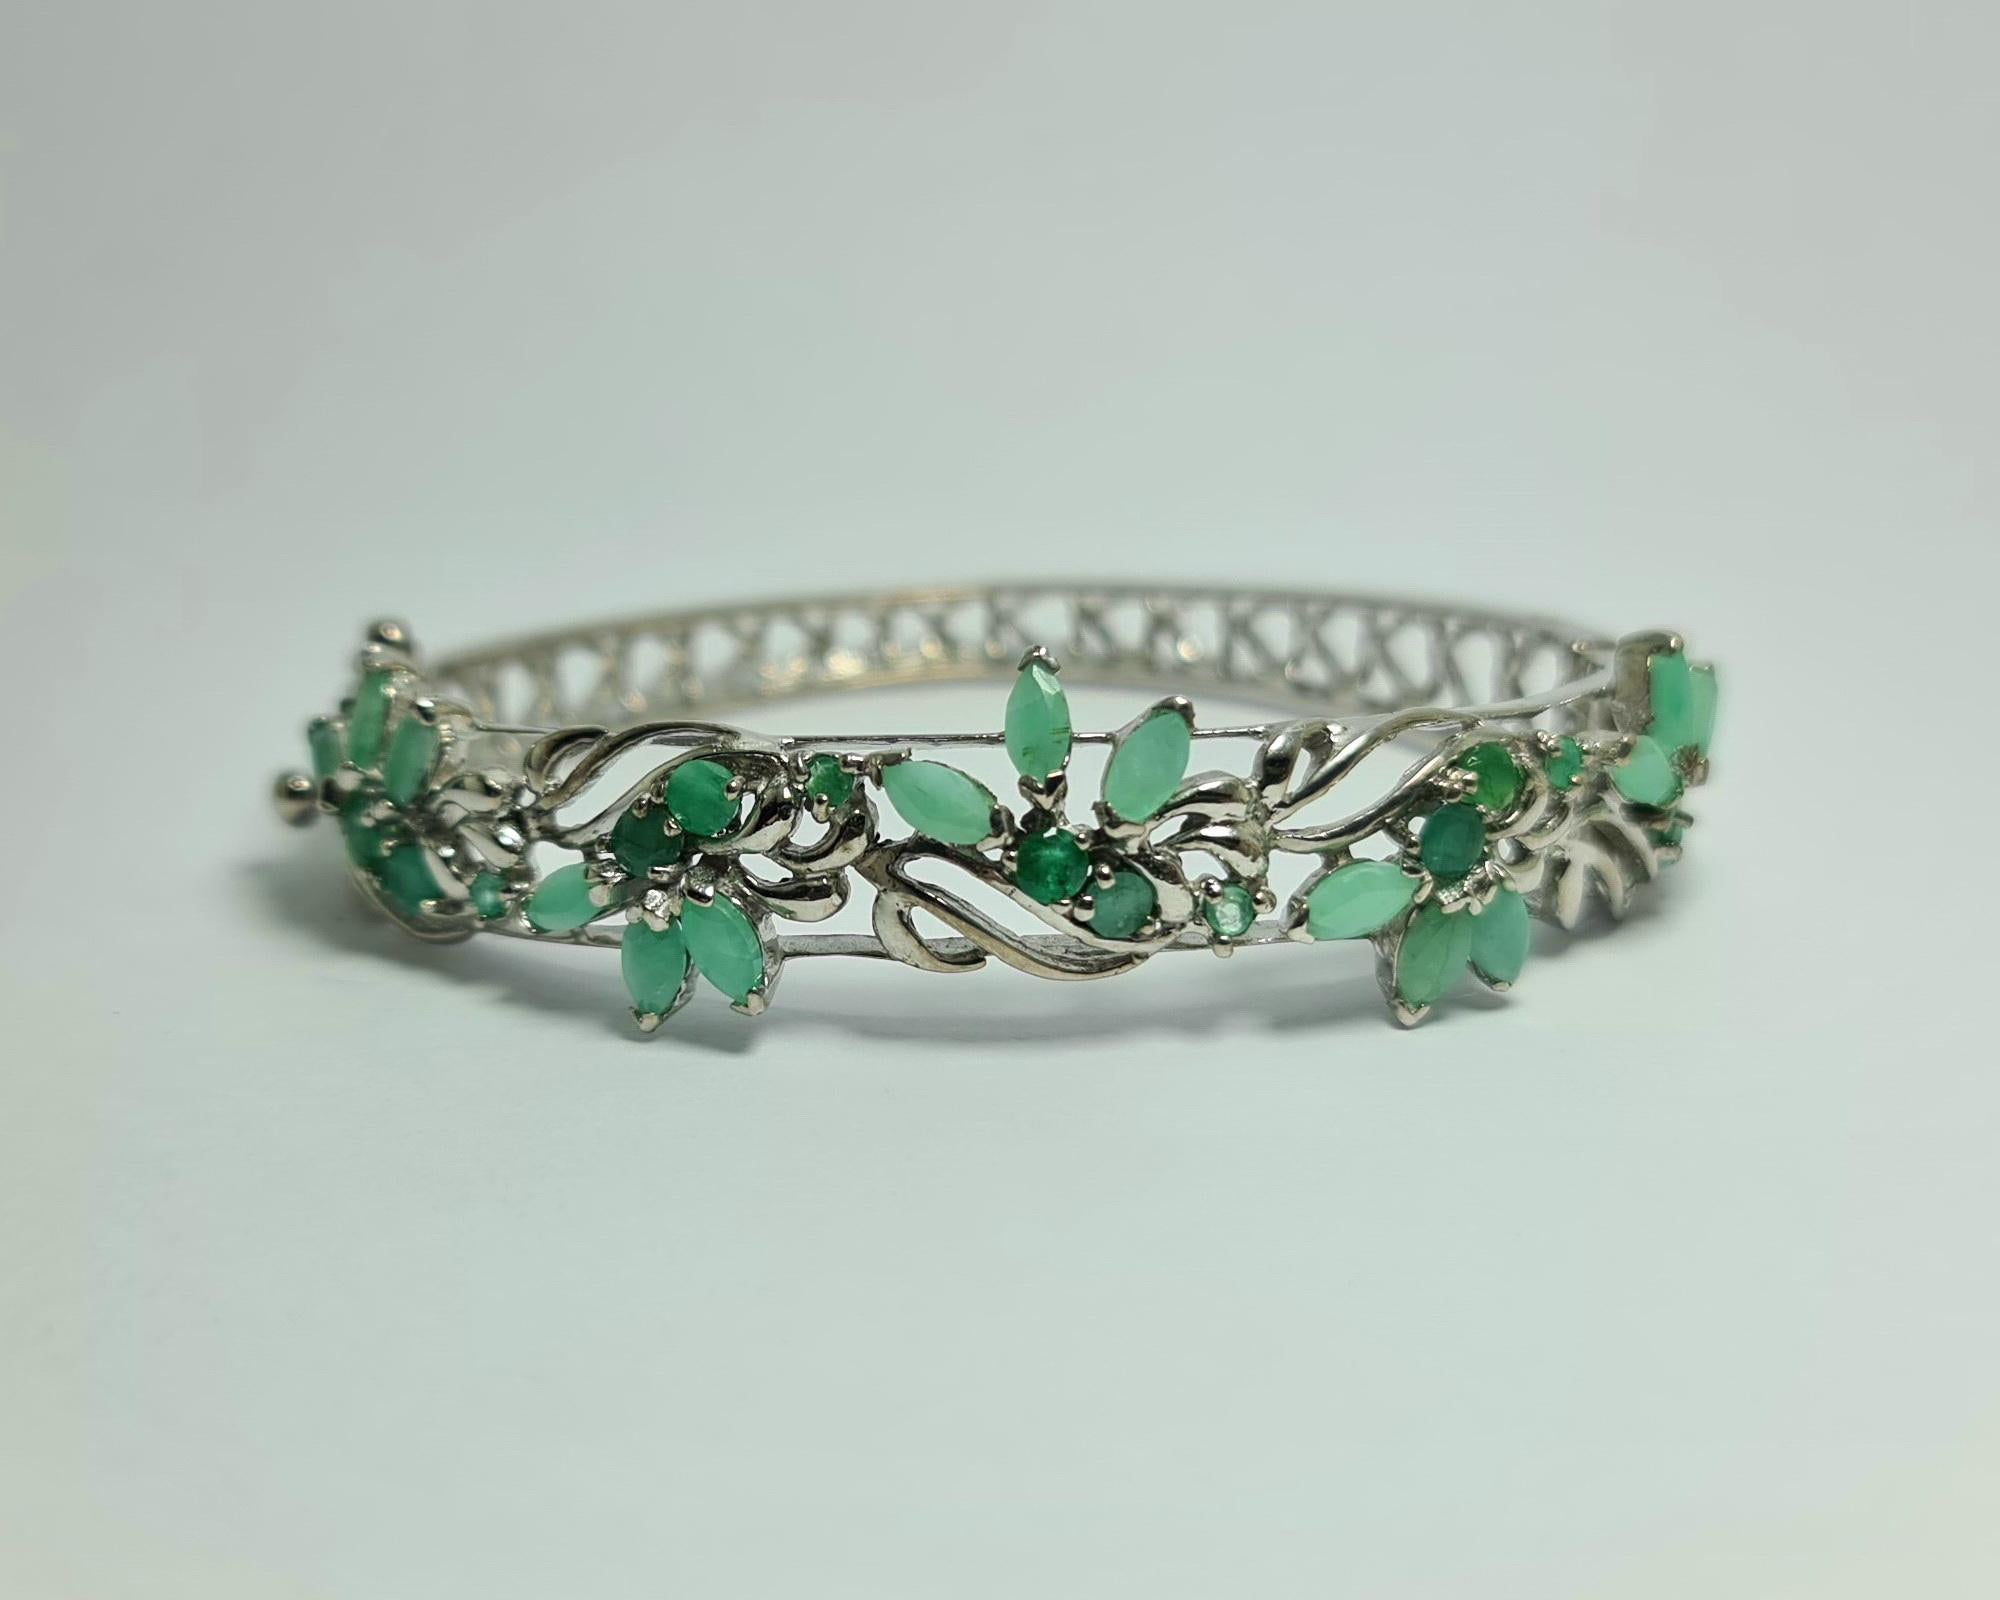 Natural Untreated Afghan Emeralds, Marquise and Rounds  cuts set in Pure .925 Sterling Silver with Rhodium Plating Hinged Bangle Bracelet Cuff

Total carat weight: 14 carats
Total weight of the bracelet: 27 grams